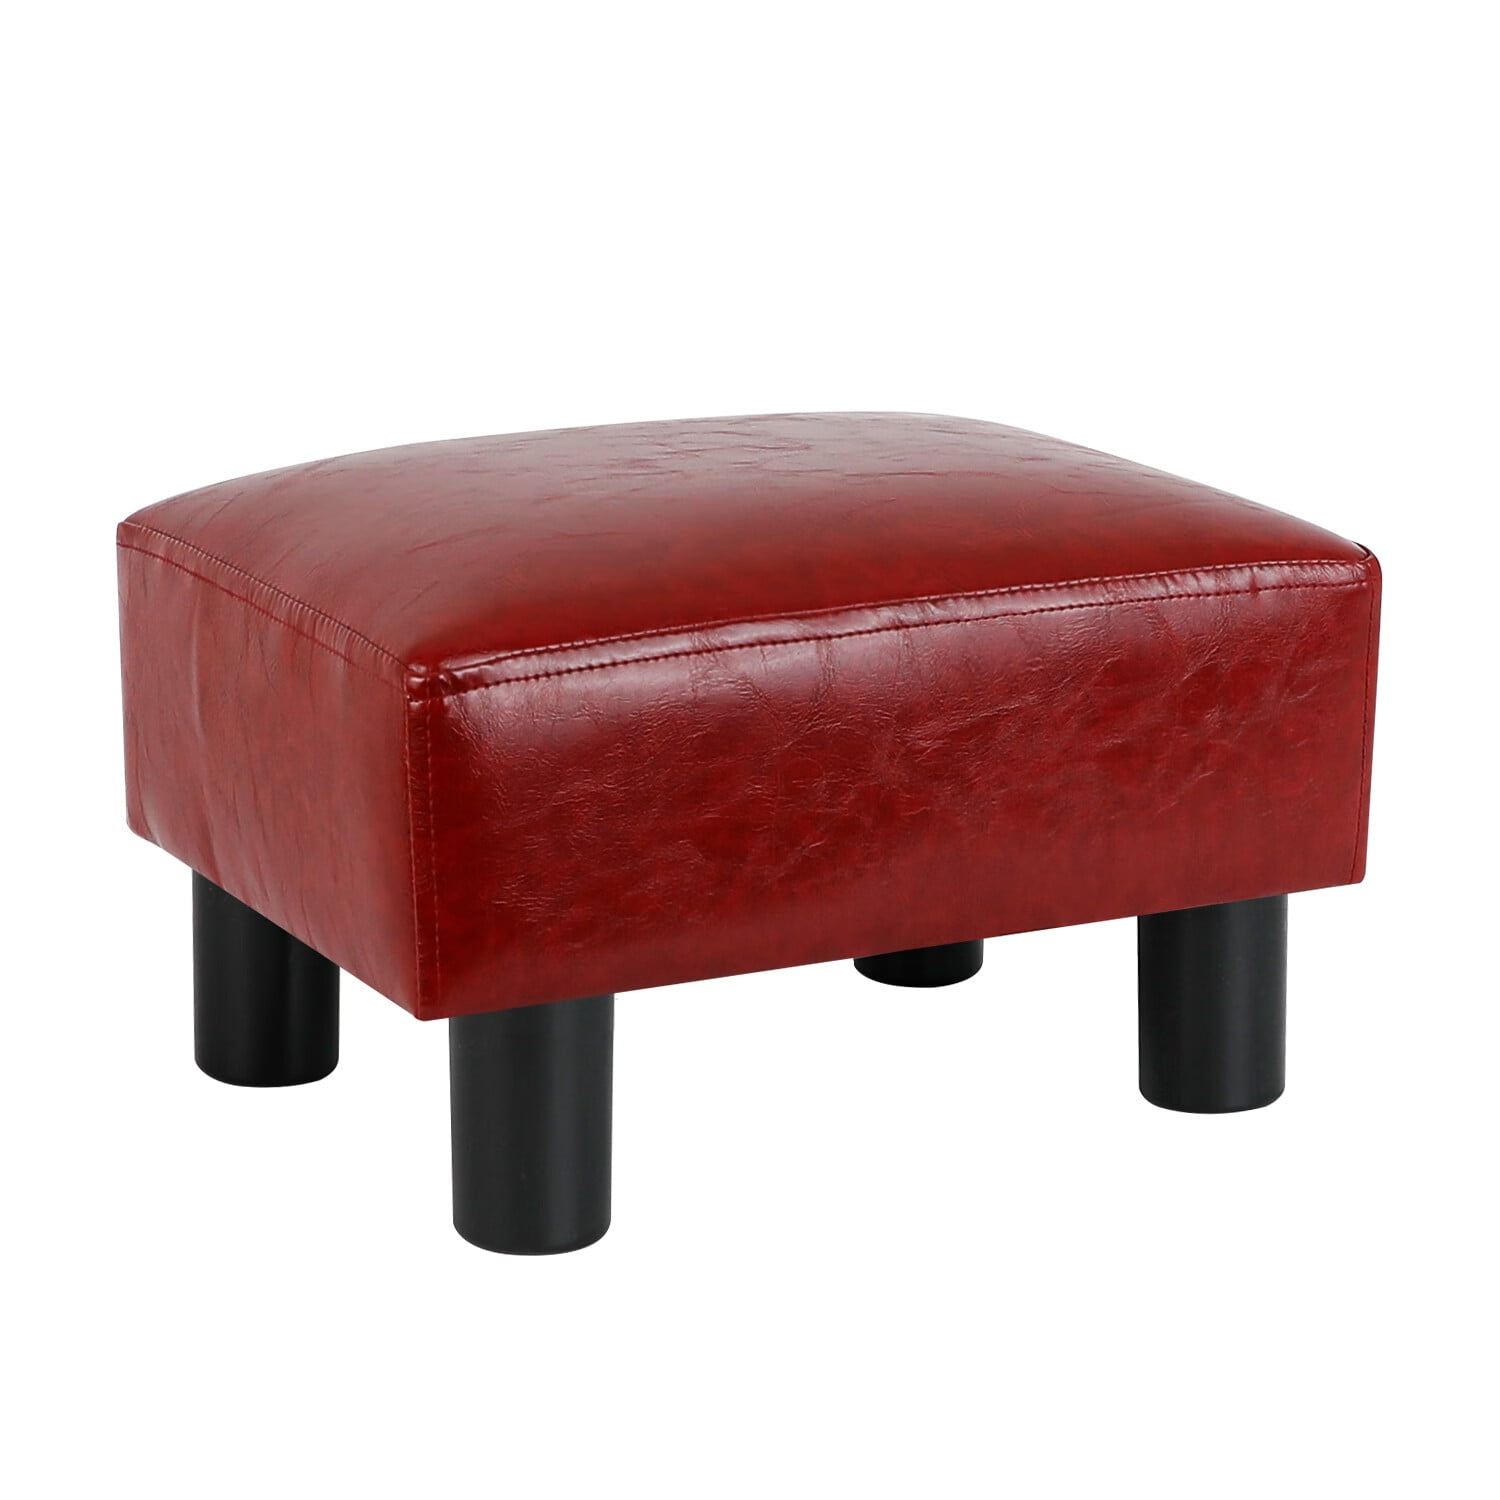  LKZ Foot Stool Microfiber Leather Ottoman Wooden Vintage Stool  Small Sofa Footrest Stool for Living Room(Red-Brown) : Home & Kitchen